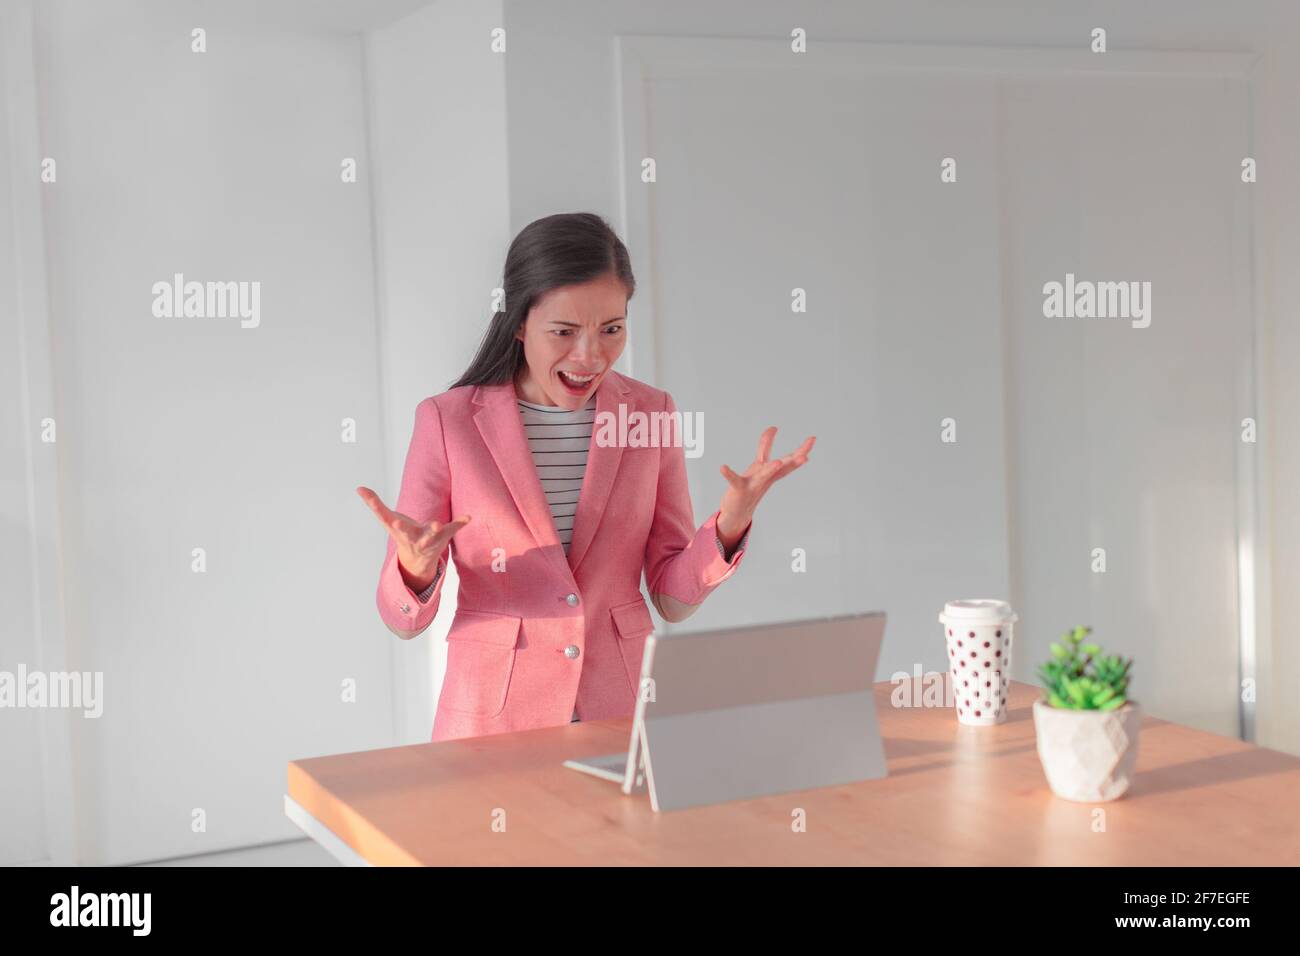 Angry business woman with bad internet connection working on laptop from home during videocall online with work colleagues. Asian businesswoman Stock Photo